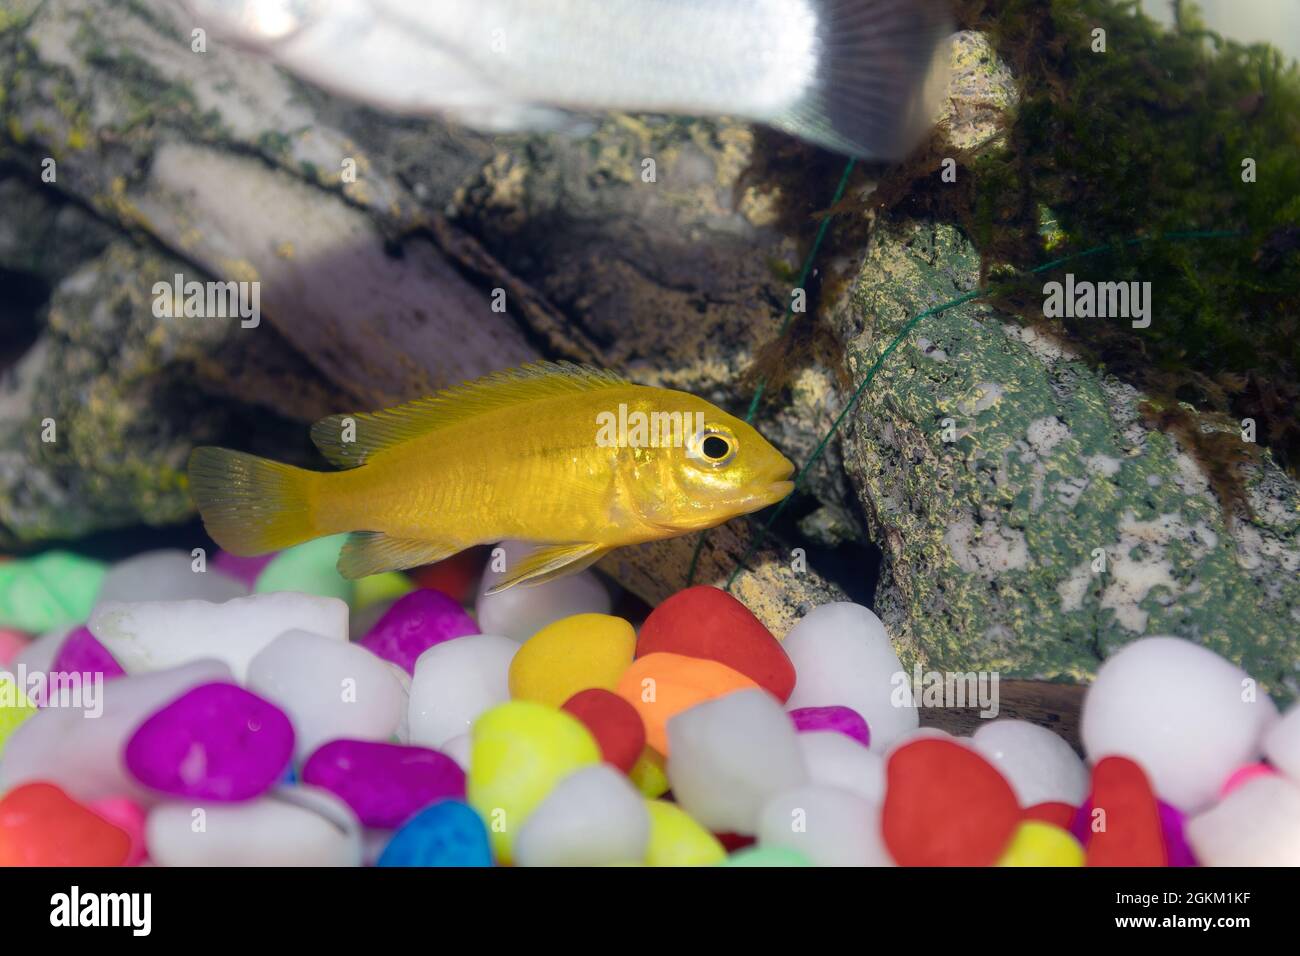 Small African Malawi Cichlid fish in a home aquarium Stock Photo